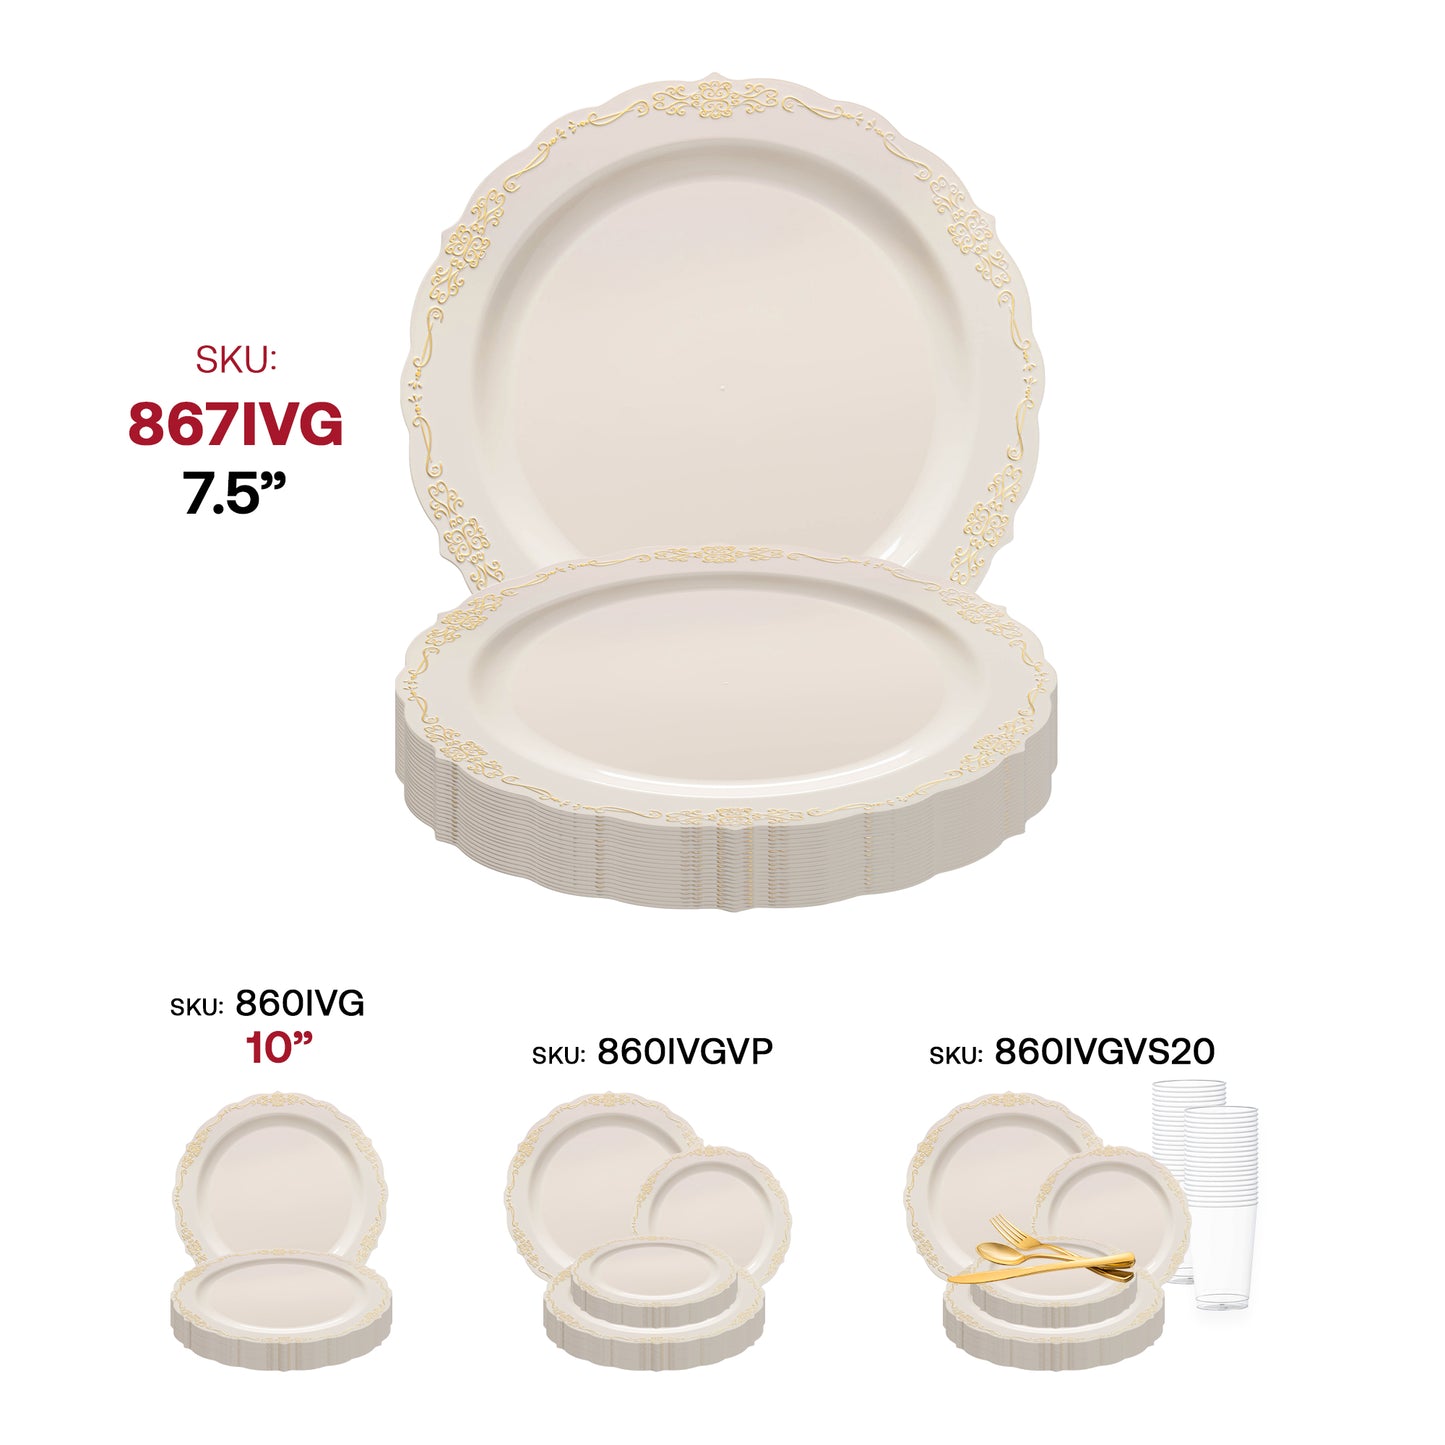 Ivory with Gold Vintage Rim Round Disposable Plastic Appetizer/Salad Plates (7.5") SKU | The Kaya Collection